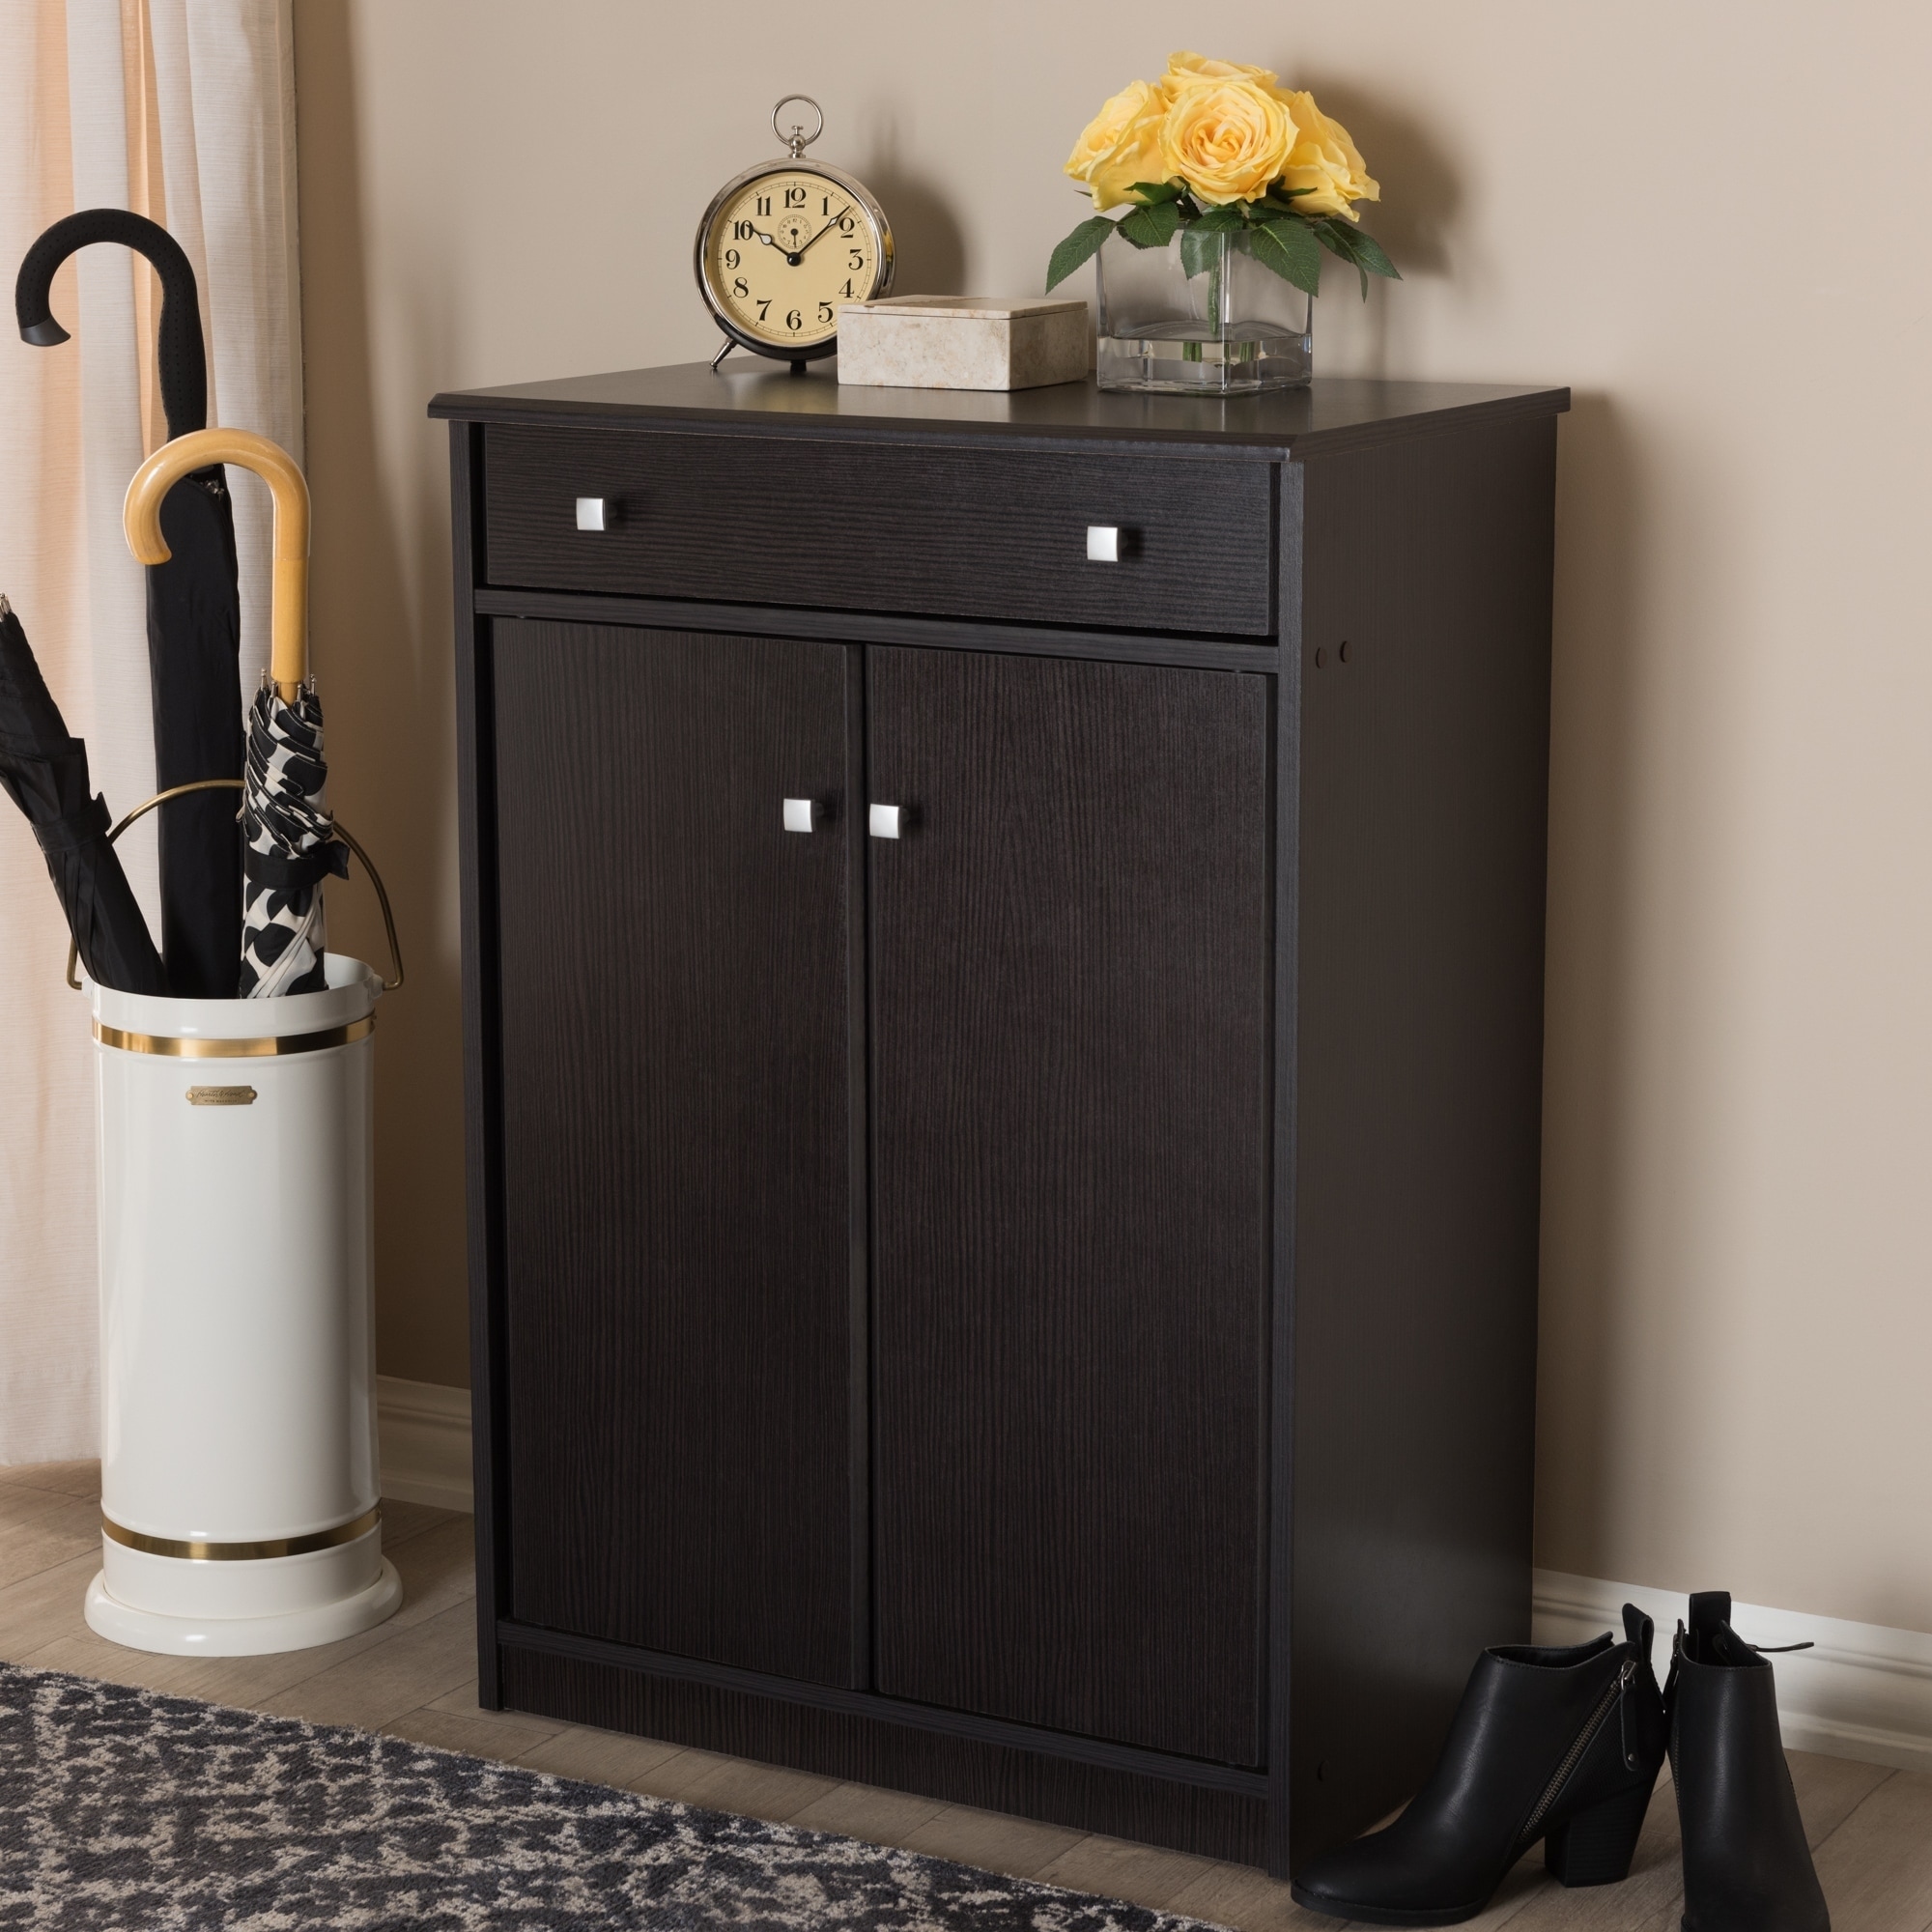 https://ak1.ostkcdn.com/images/products/22580566/Contemporary-Dark-Brown-Shoe-Cabinet-by-Baxton-Studio-8e7c6fce-bff3-4823-899a-1edc313cd21a.jpg